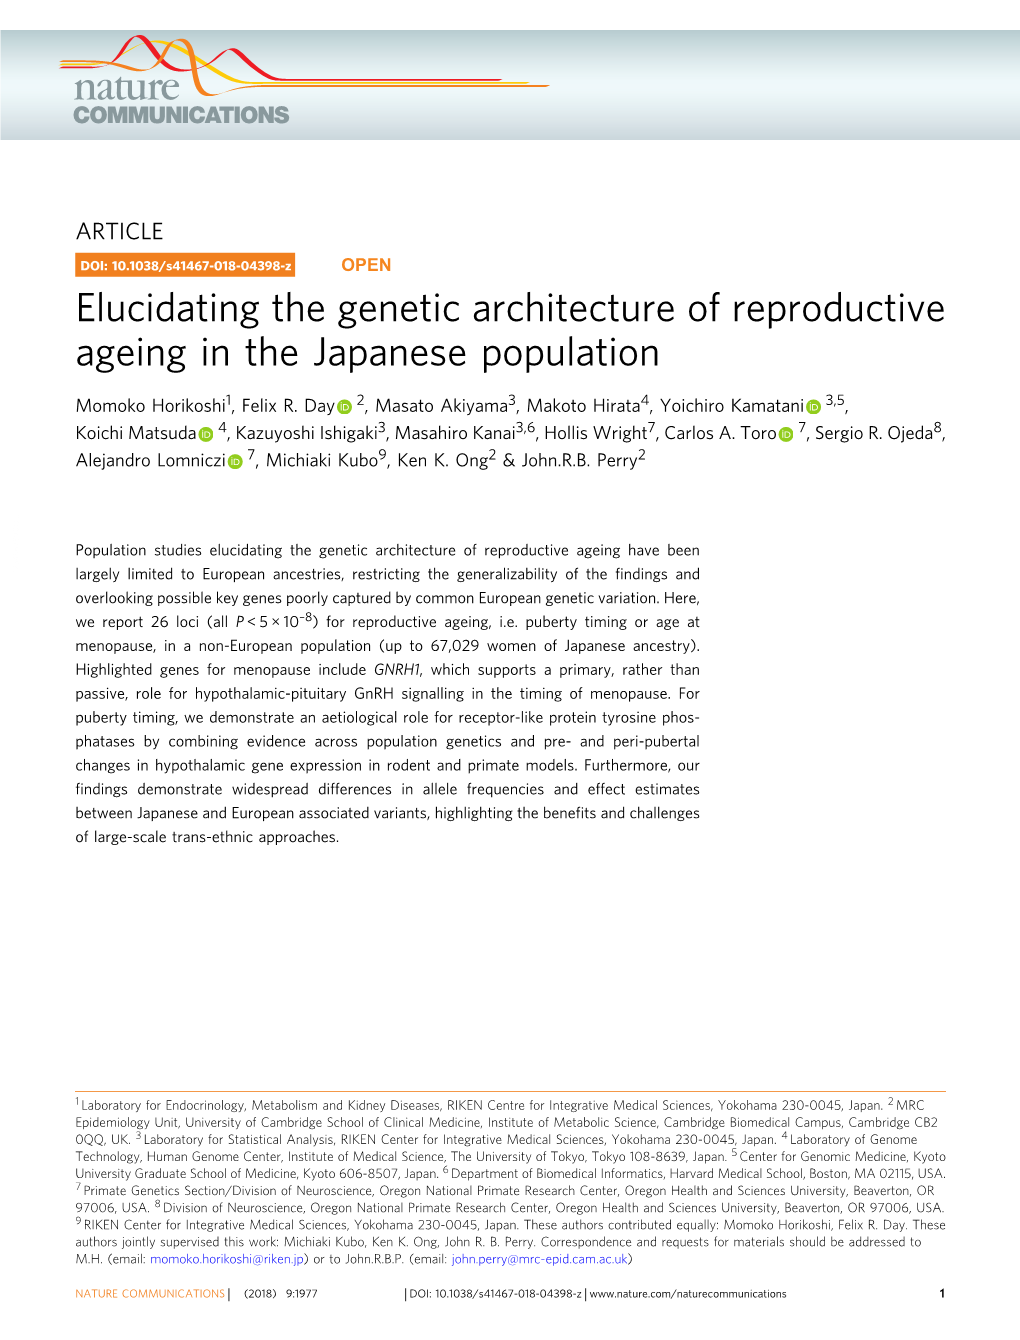 Elucidating the Genetic Architecture of Reproductive Ageing in the Japanese Population